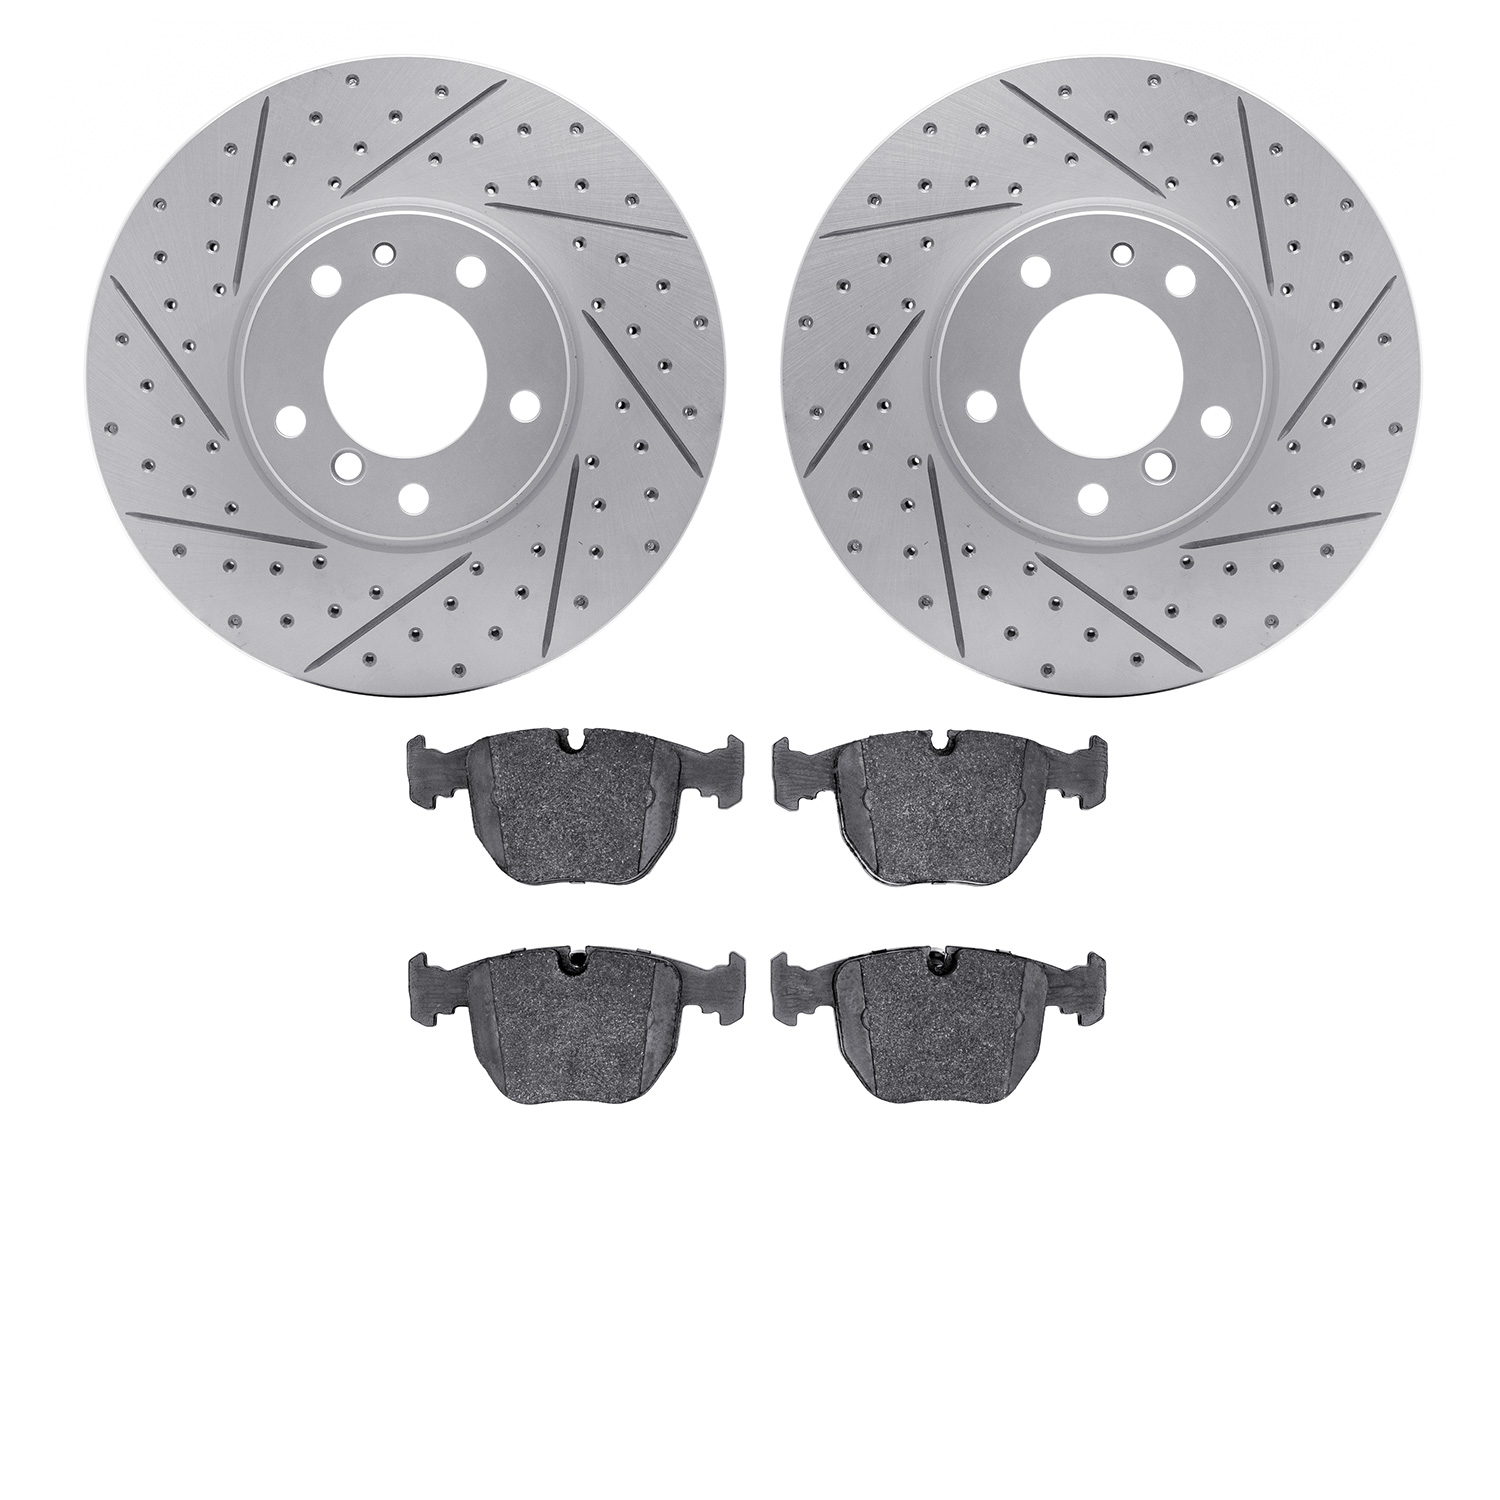 2502-31011 Geoperformance Drilled/Slotted Rotors w/5000 Advanced Brake Pads Kit, 1995-2001 BMW, Position: Front